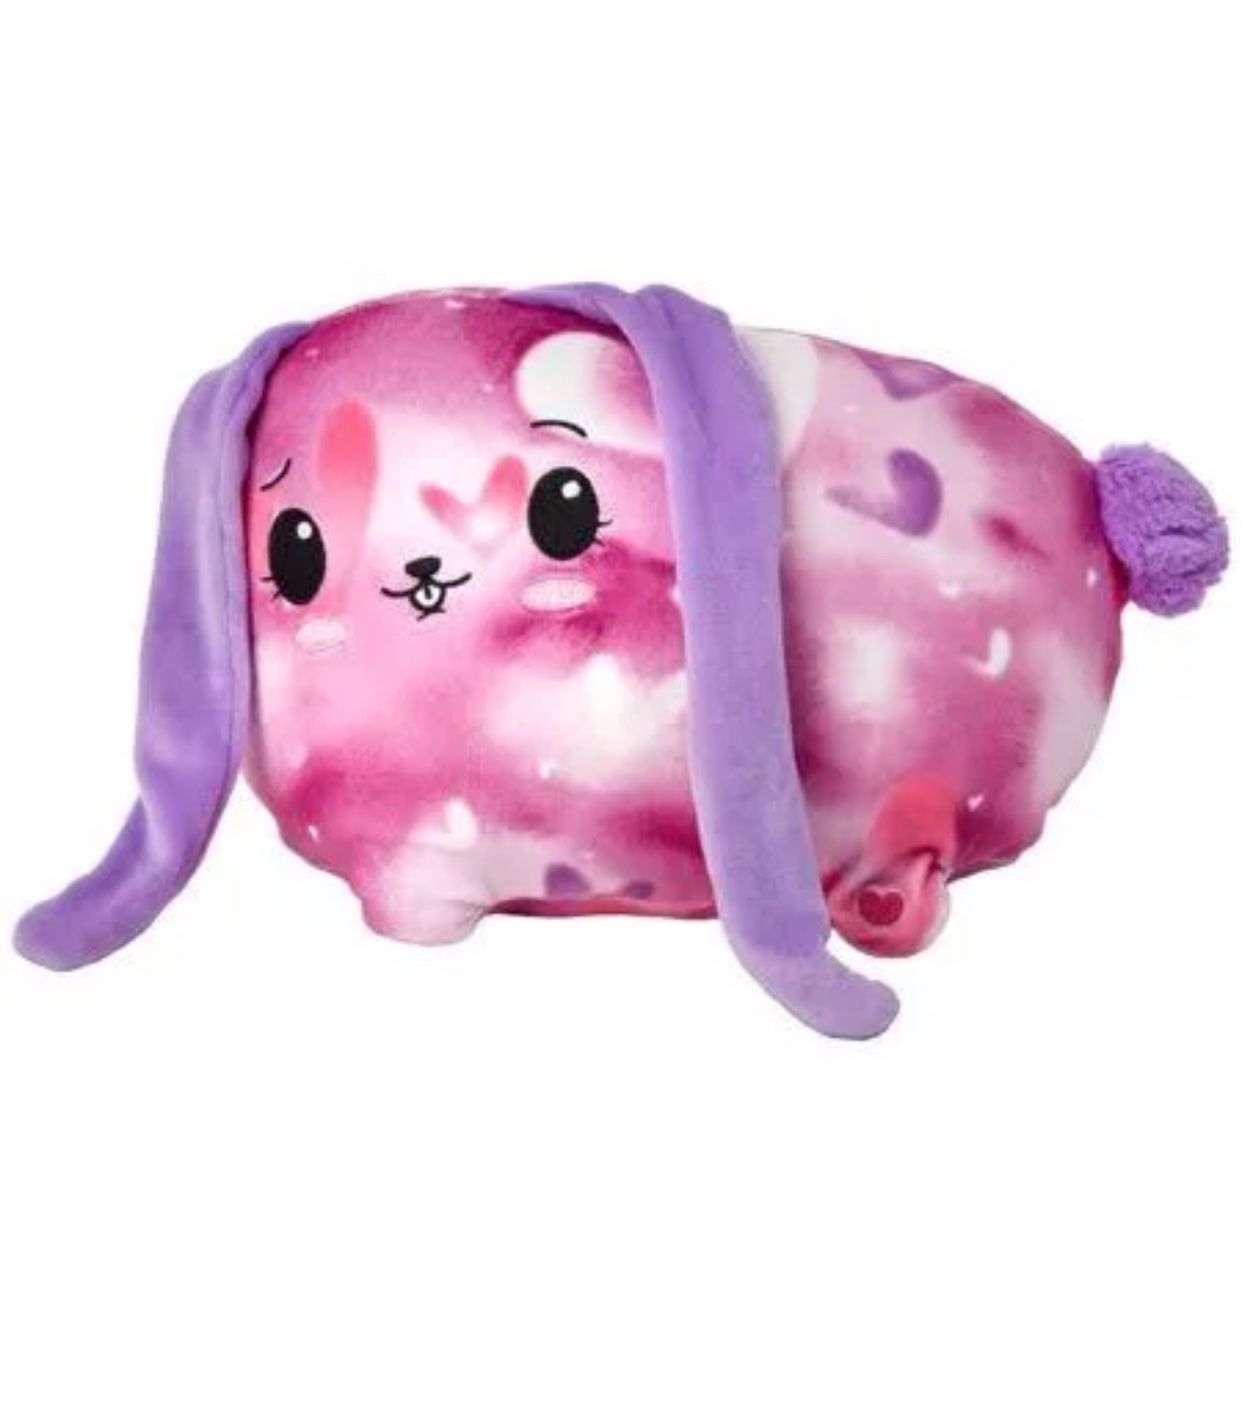 Pikmi Pops Jelly Dreams Bunny - Collectible 11 inch LED Light Up Glowing Plush ToyNight light pillow